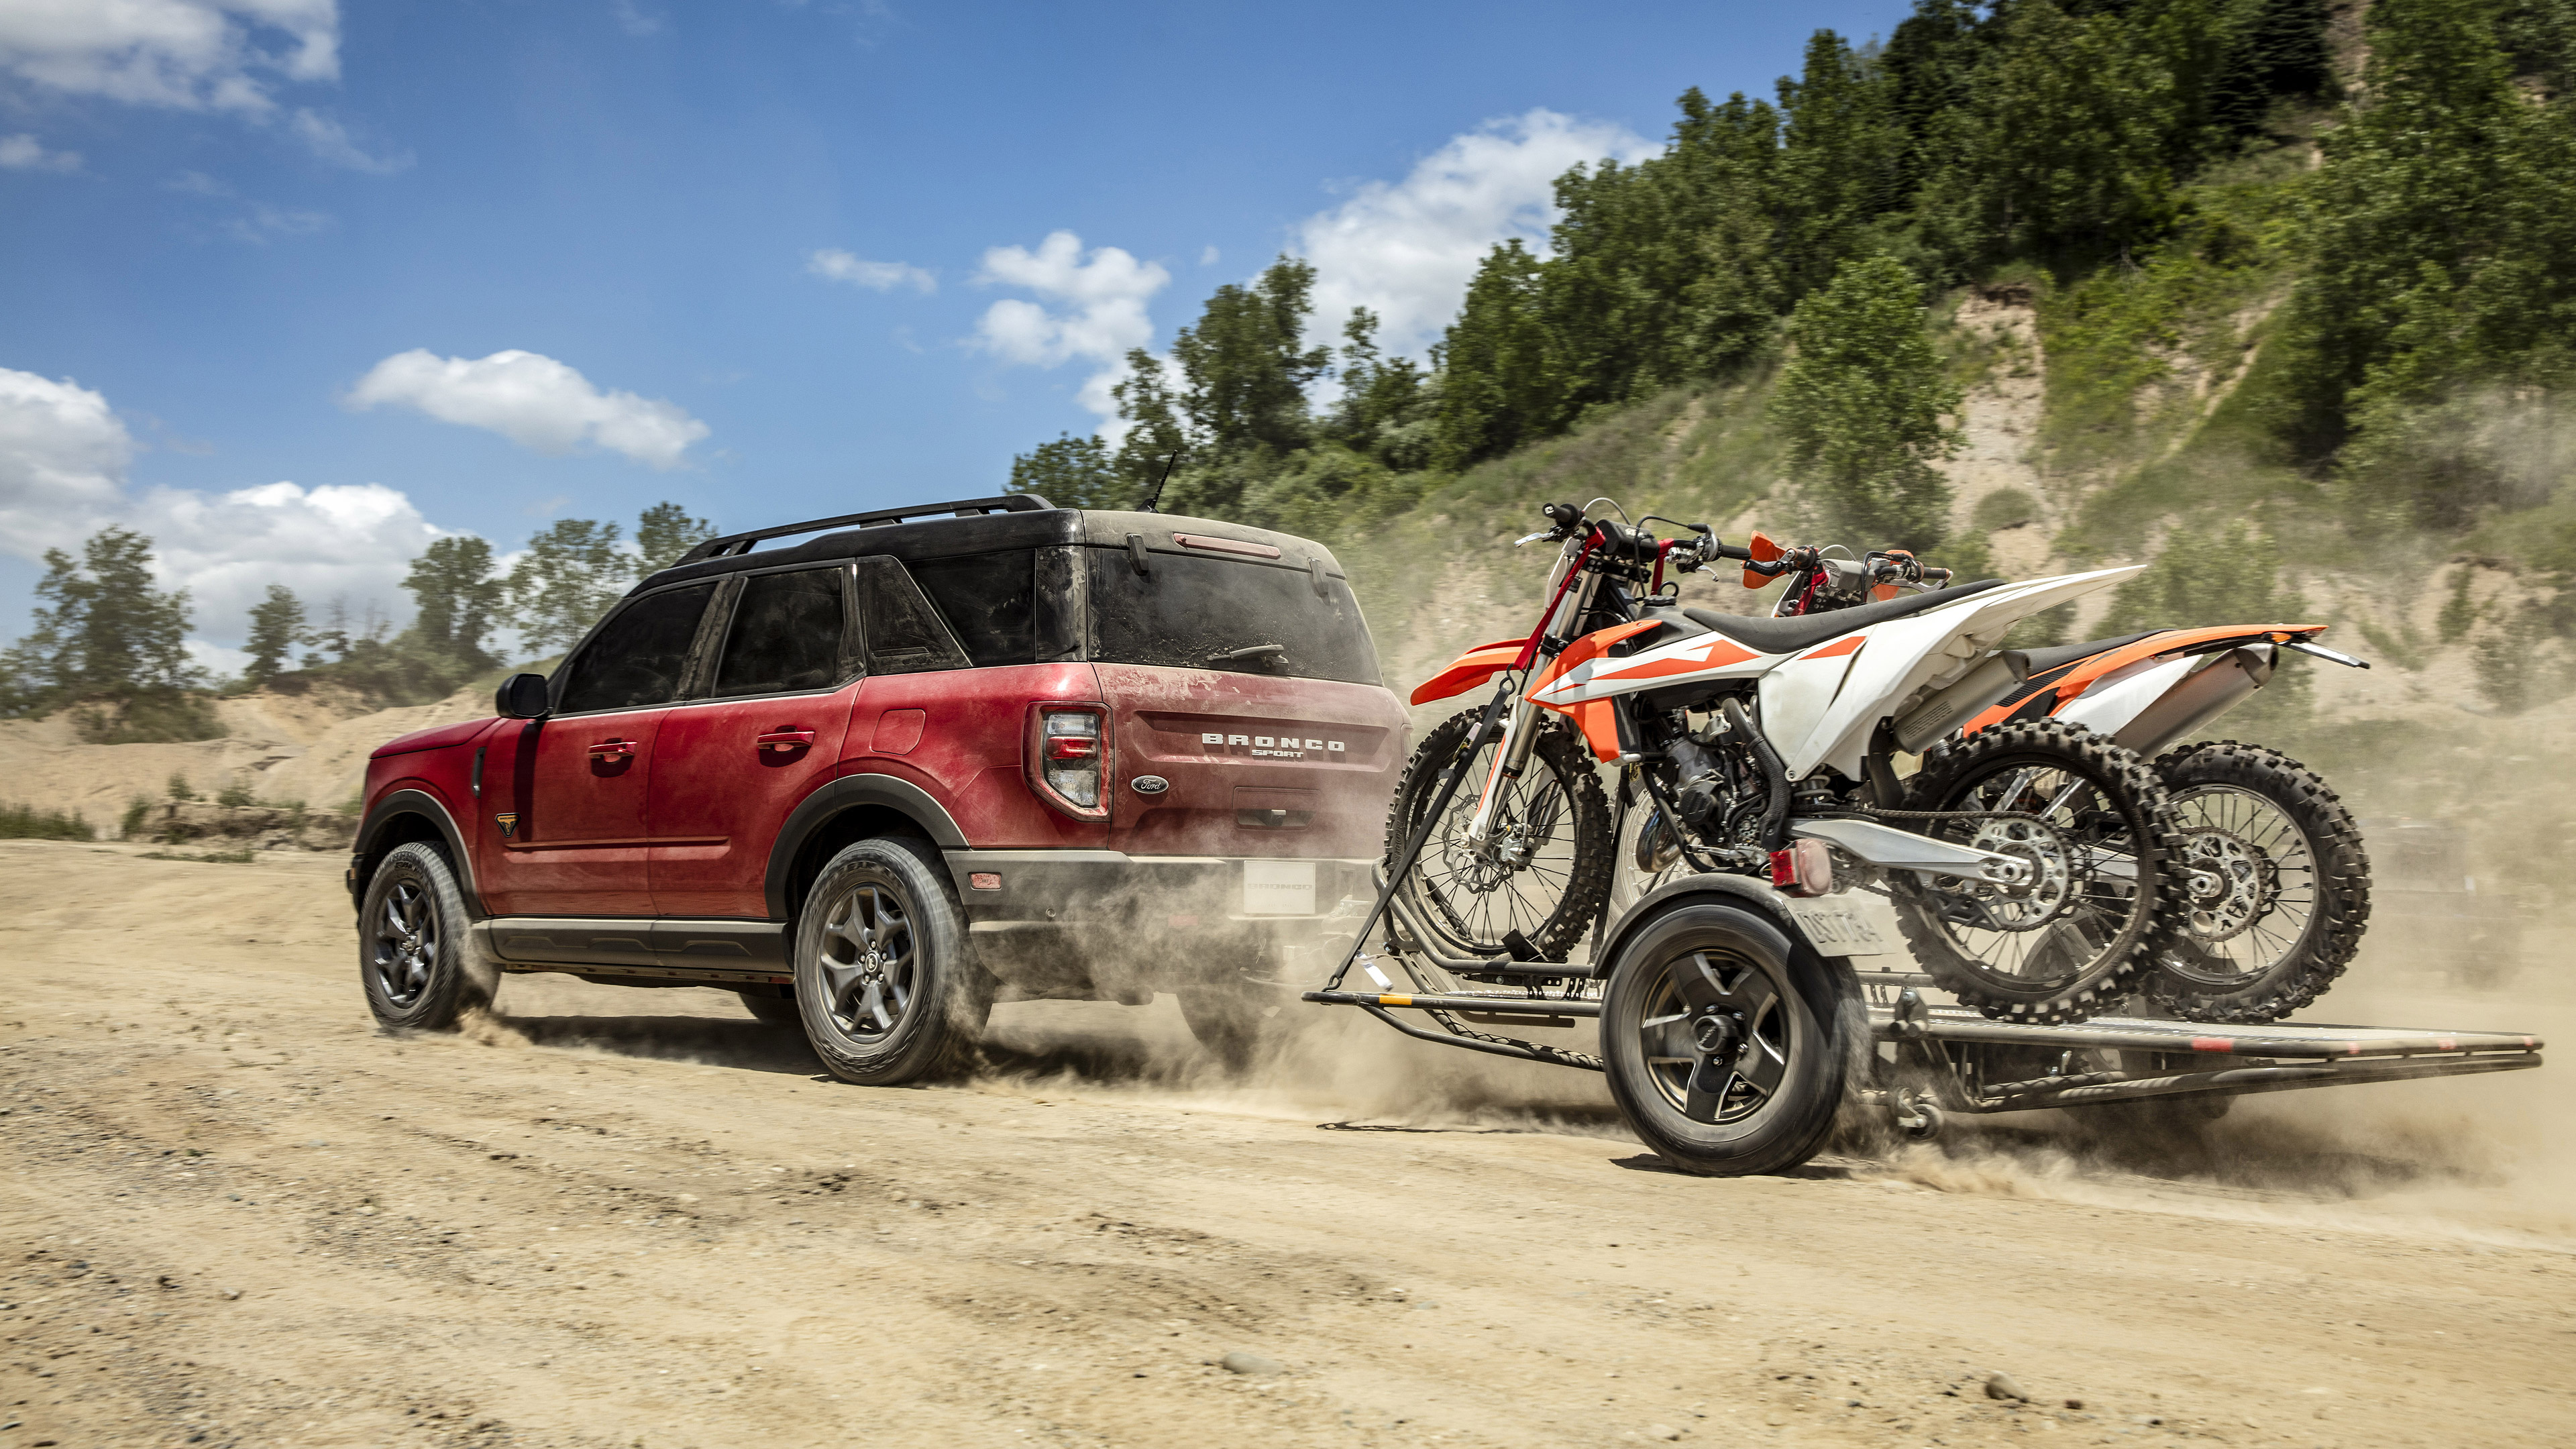 Ford Bronco: Towing Capacity, Wildlife Tourism, Official Partner Of Many Sports Competitions, Enduro, Motocross Bikes, Motorcycling. 3840x2160 4K Wallpaper.